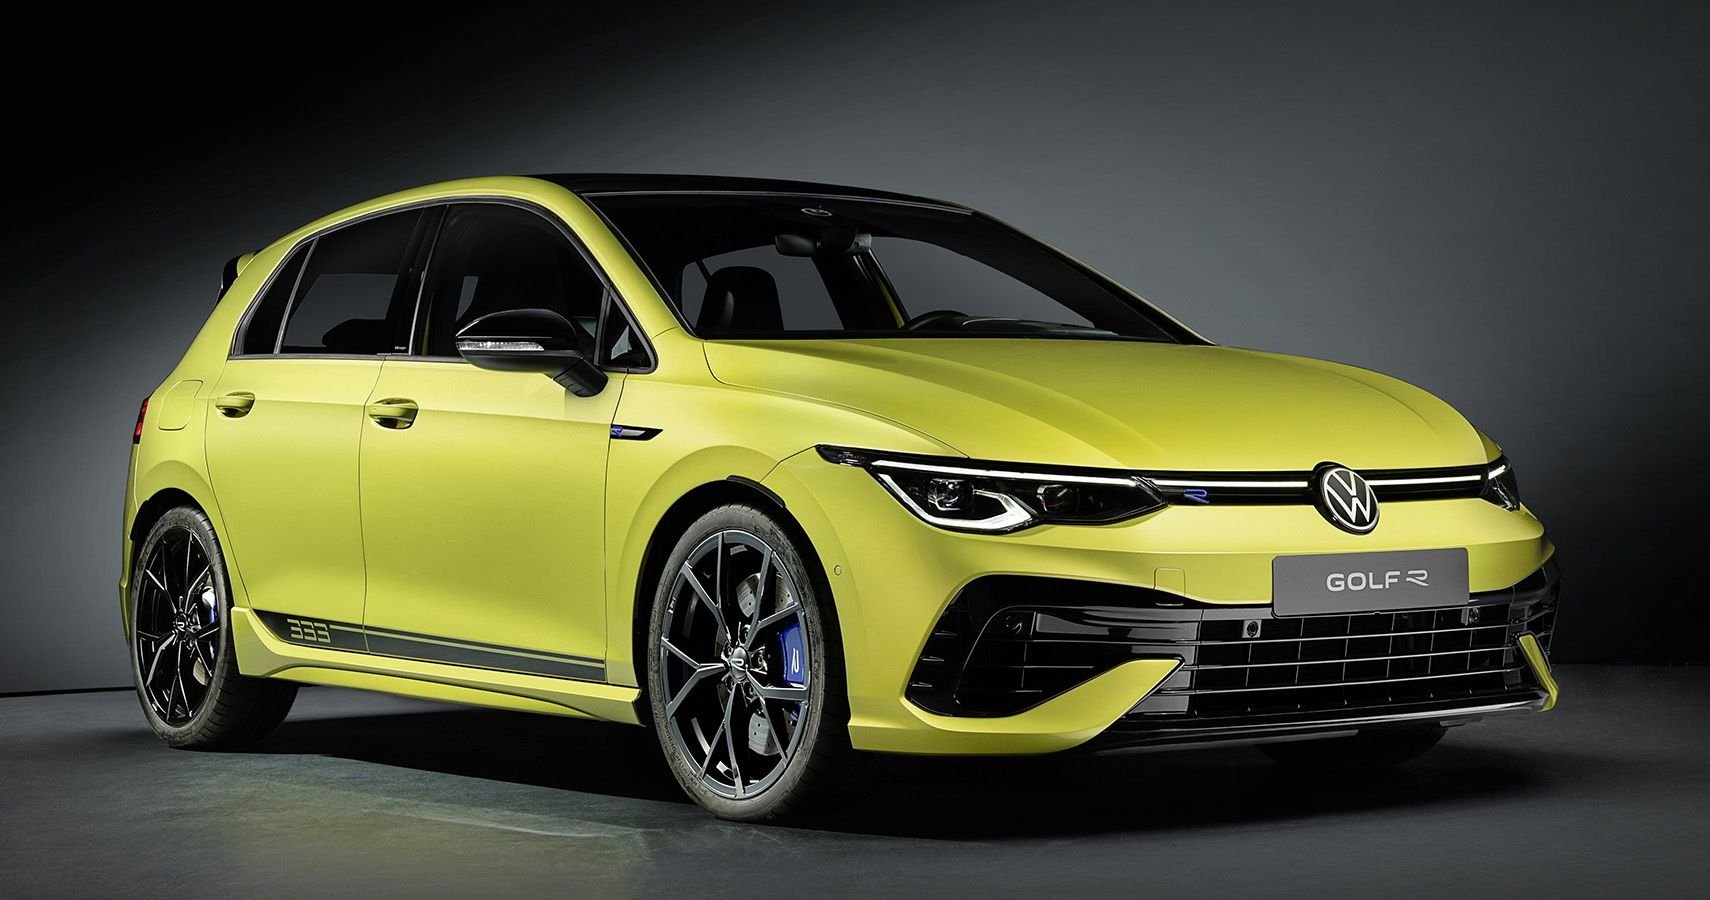 The 328-hp Volkswagen Golf R 333 Sells Out In Under 10 Minutes According To Volkswagen